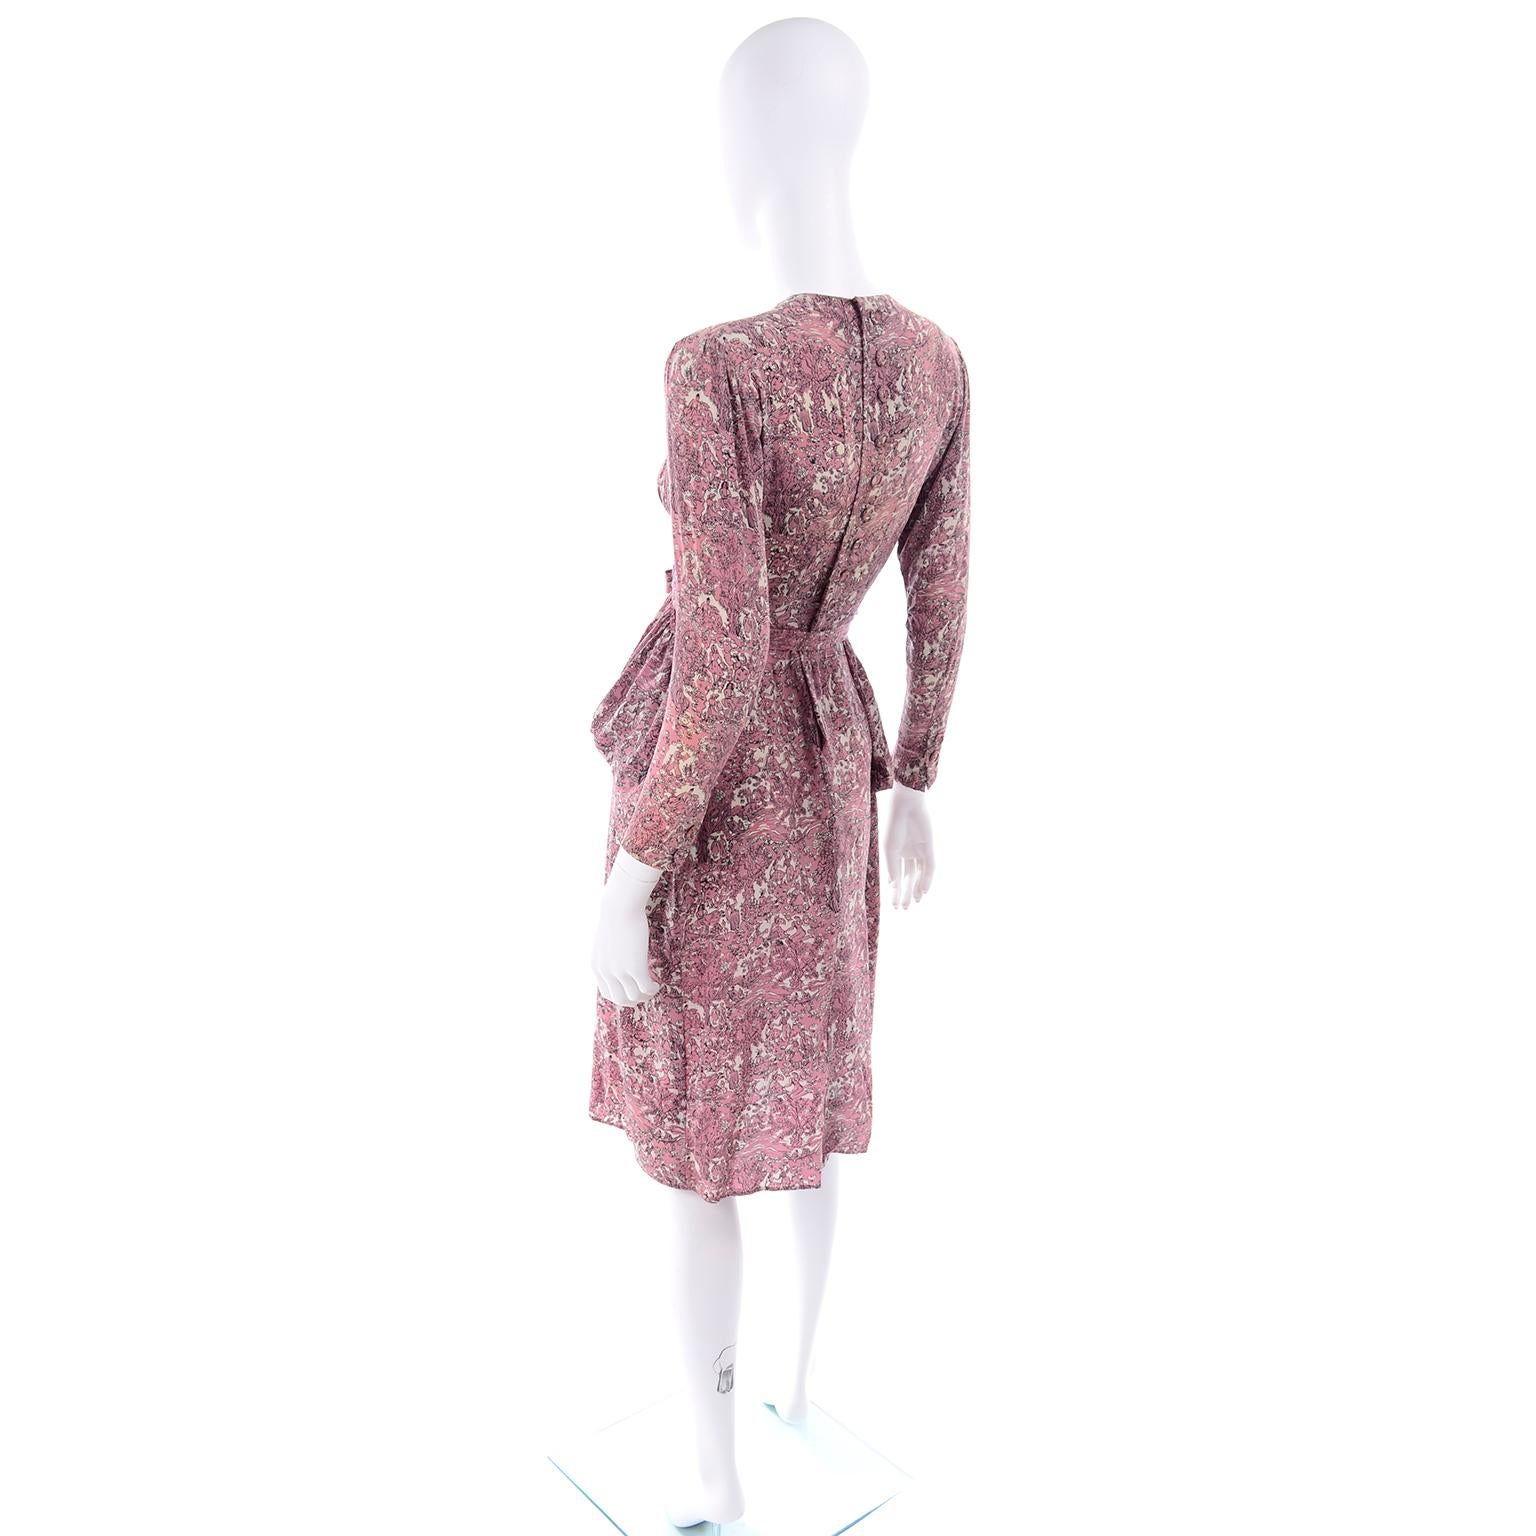 1940s Vintage Silk Dress in Rose Mauve Toile Novelty Print with Peplum 2